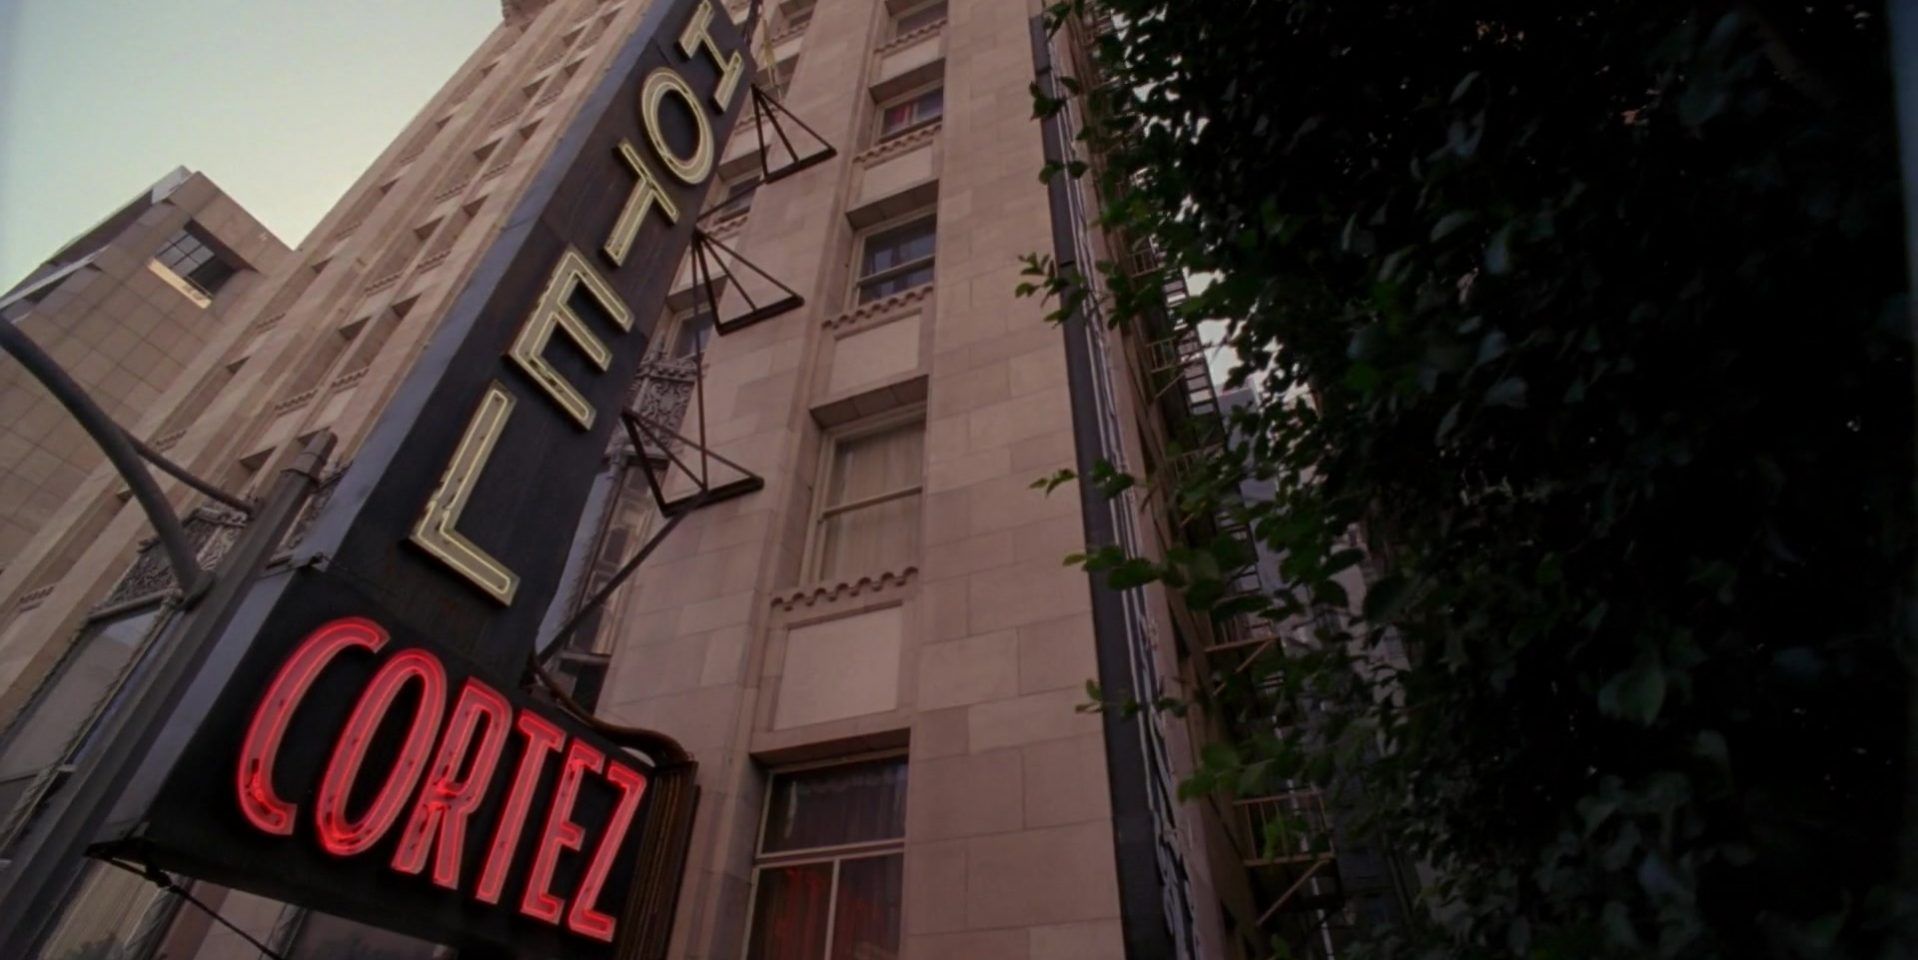 The outside of the Hotel Cortez in American Horror Story Hotel.